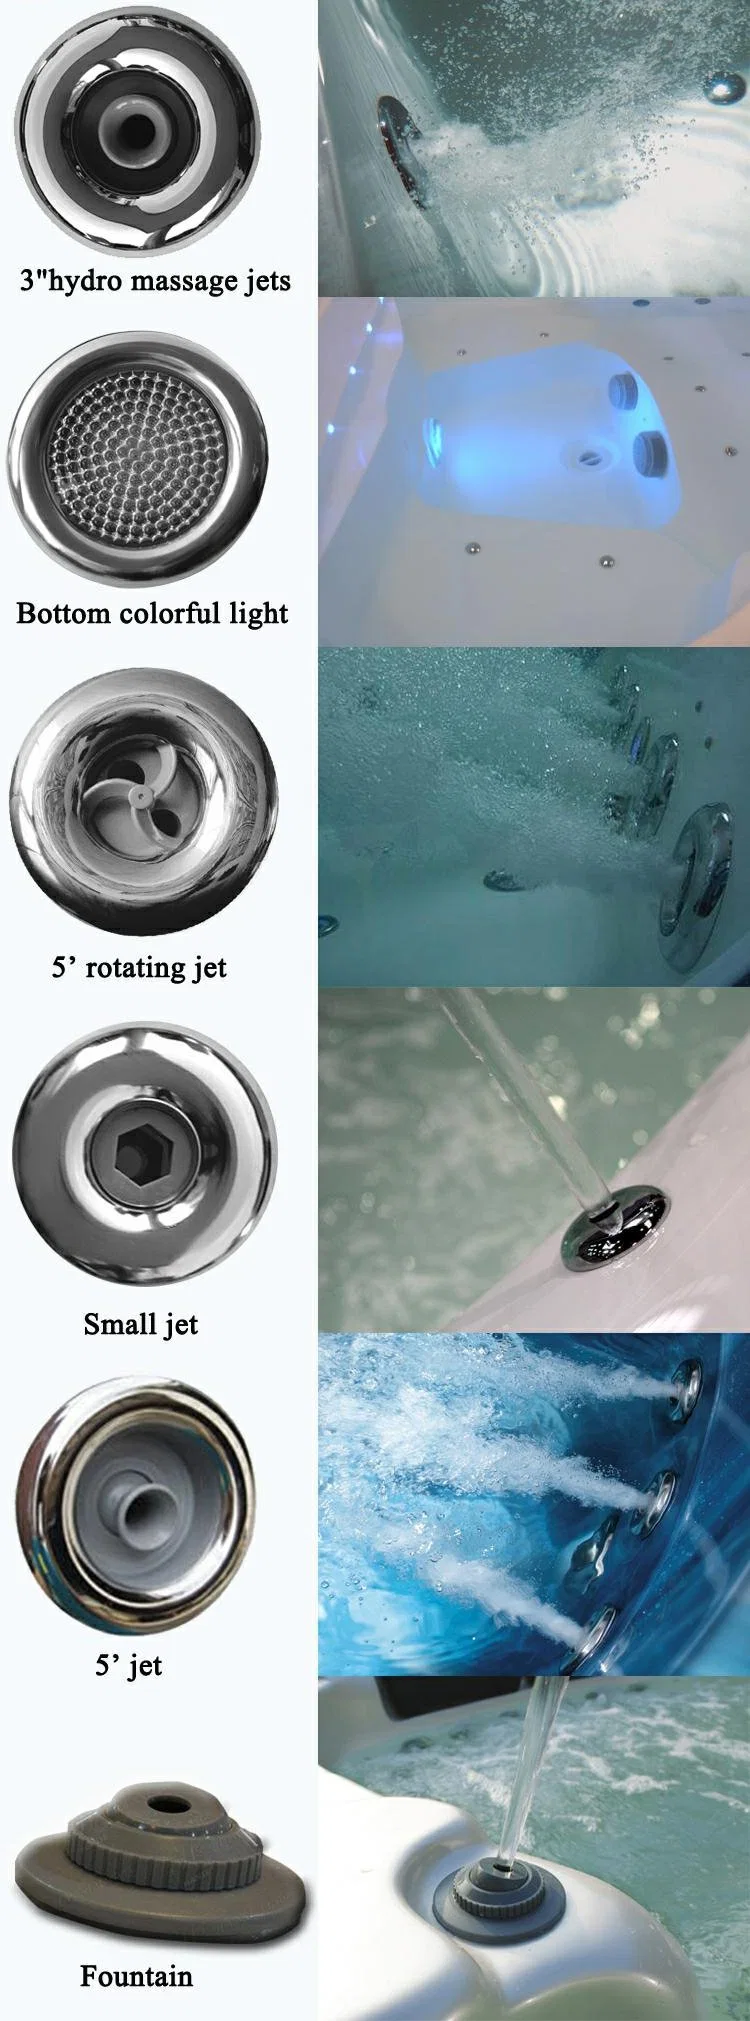 Double Whirlpool Ozone Bubble Soaker Shower Bath Jet SPA Massage Bathtubs for Small Spaces